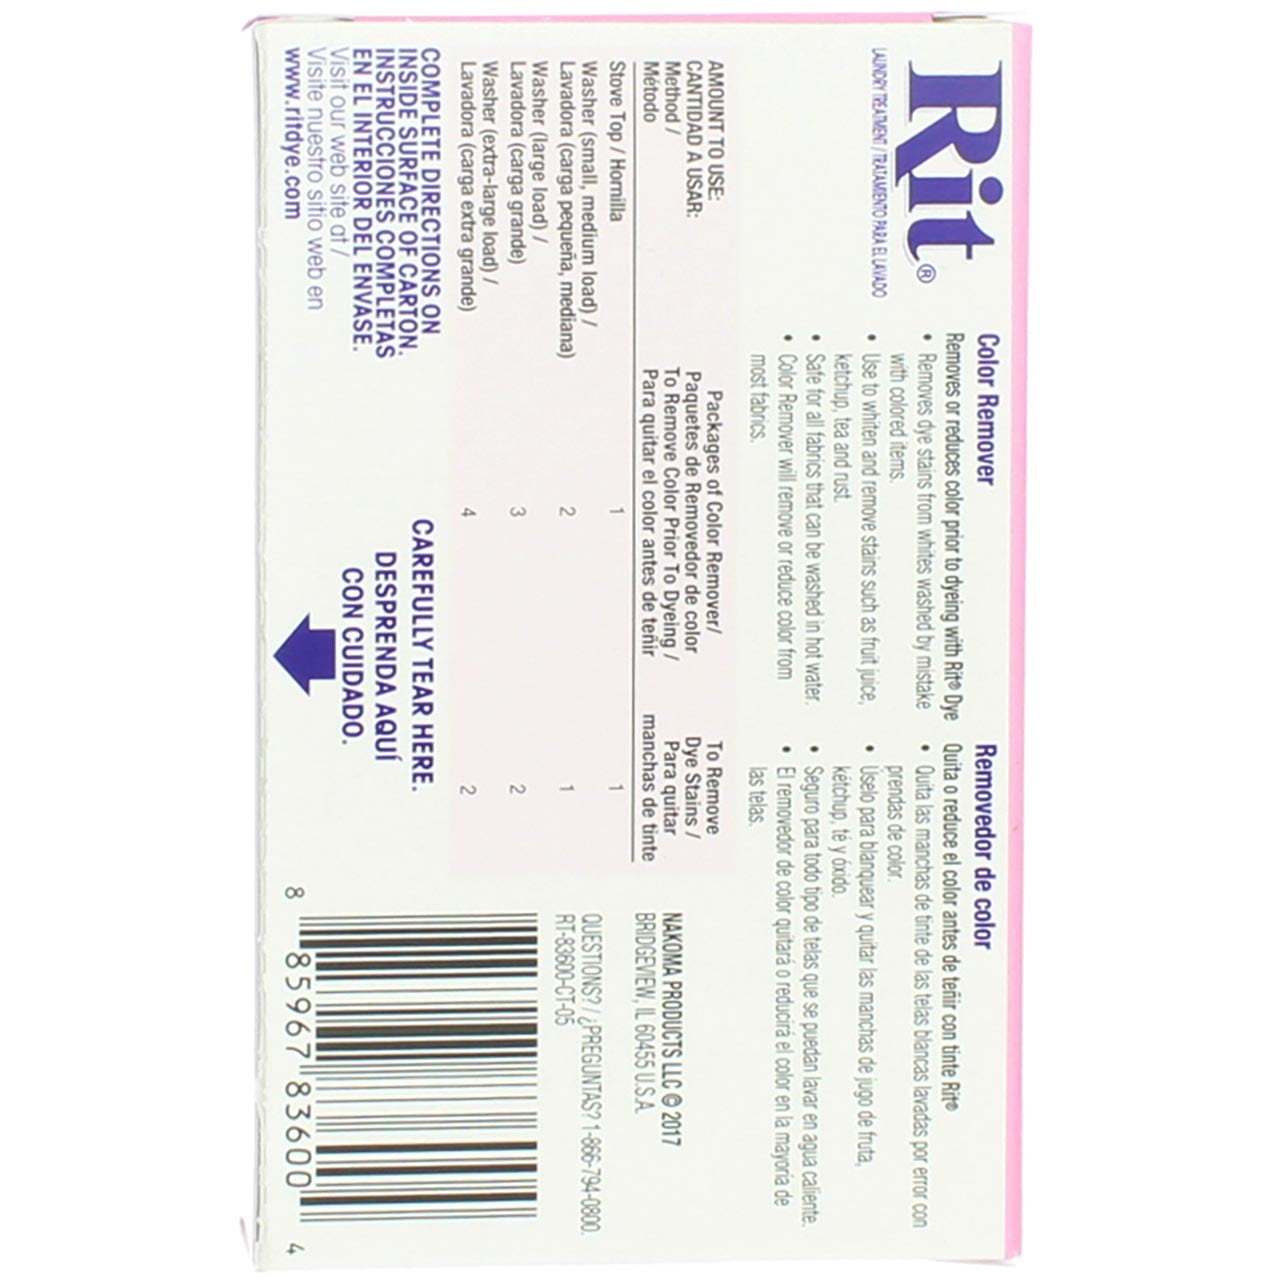 Rit, Other, Rit Dye Laundry Treatment Color Remover Powder Lot